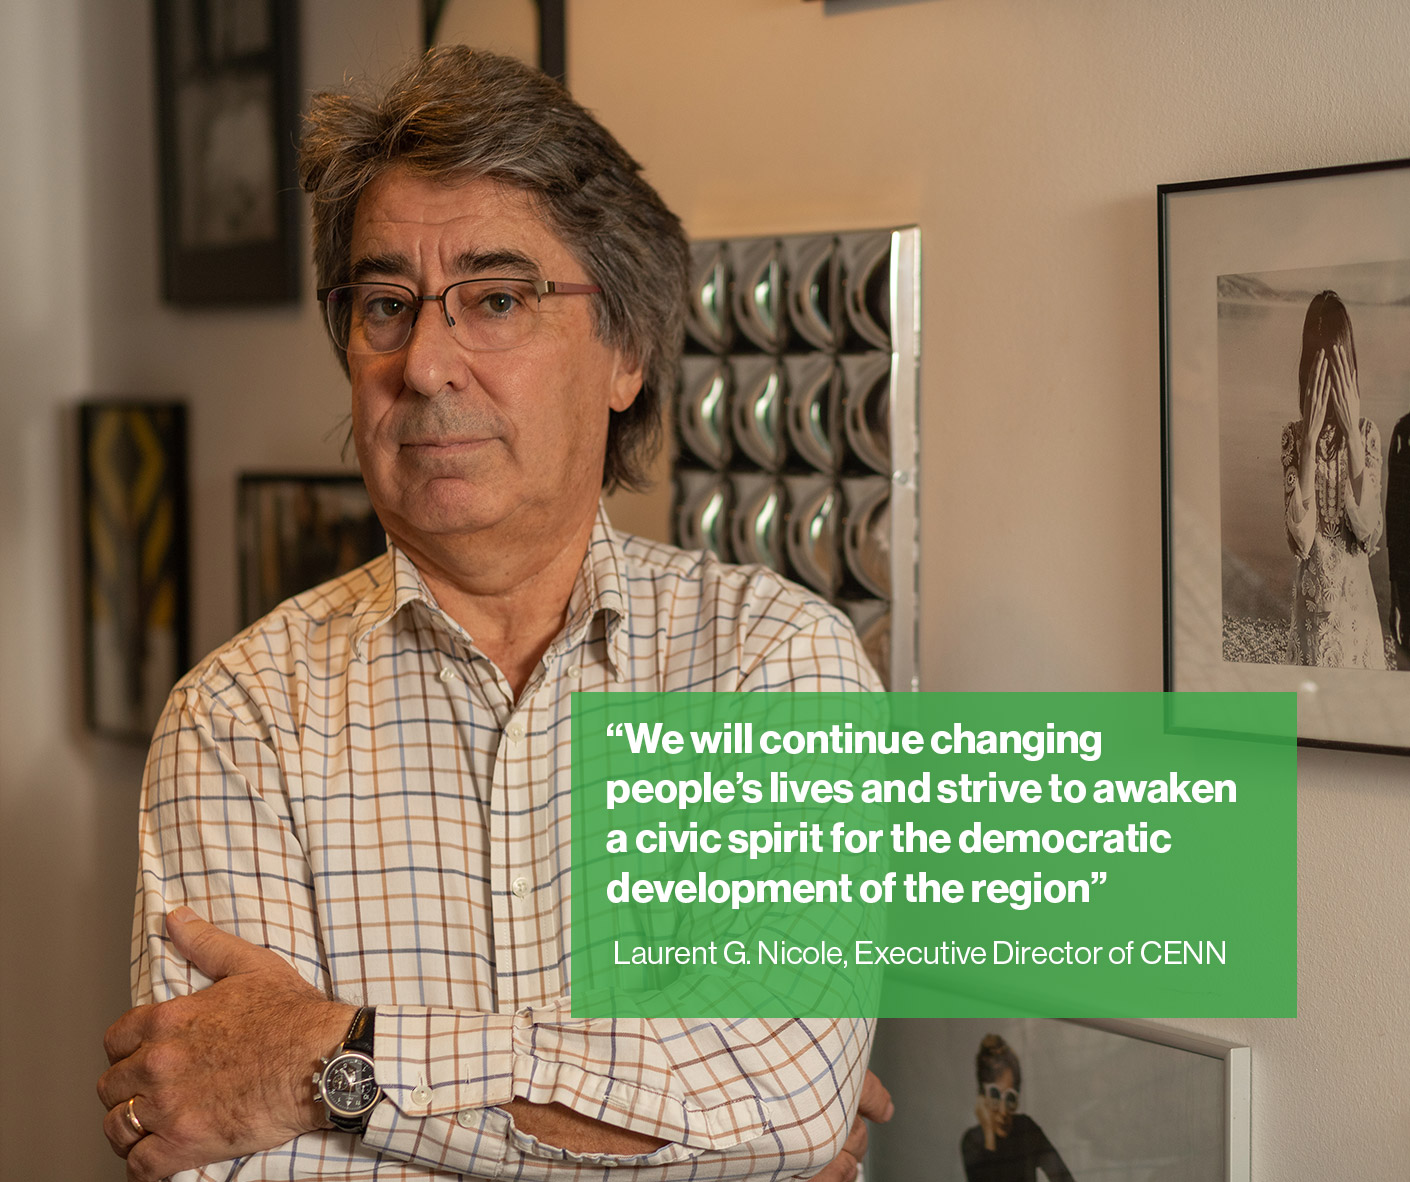 CENN appointed its new executive director – Laurent Georges Etienne Nicole, co-founder of CENN and the Chairman of the Board